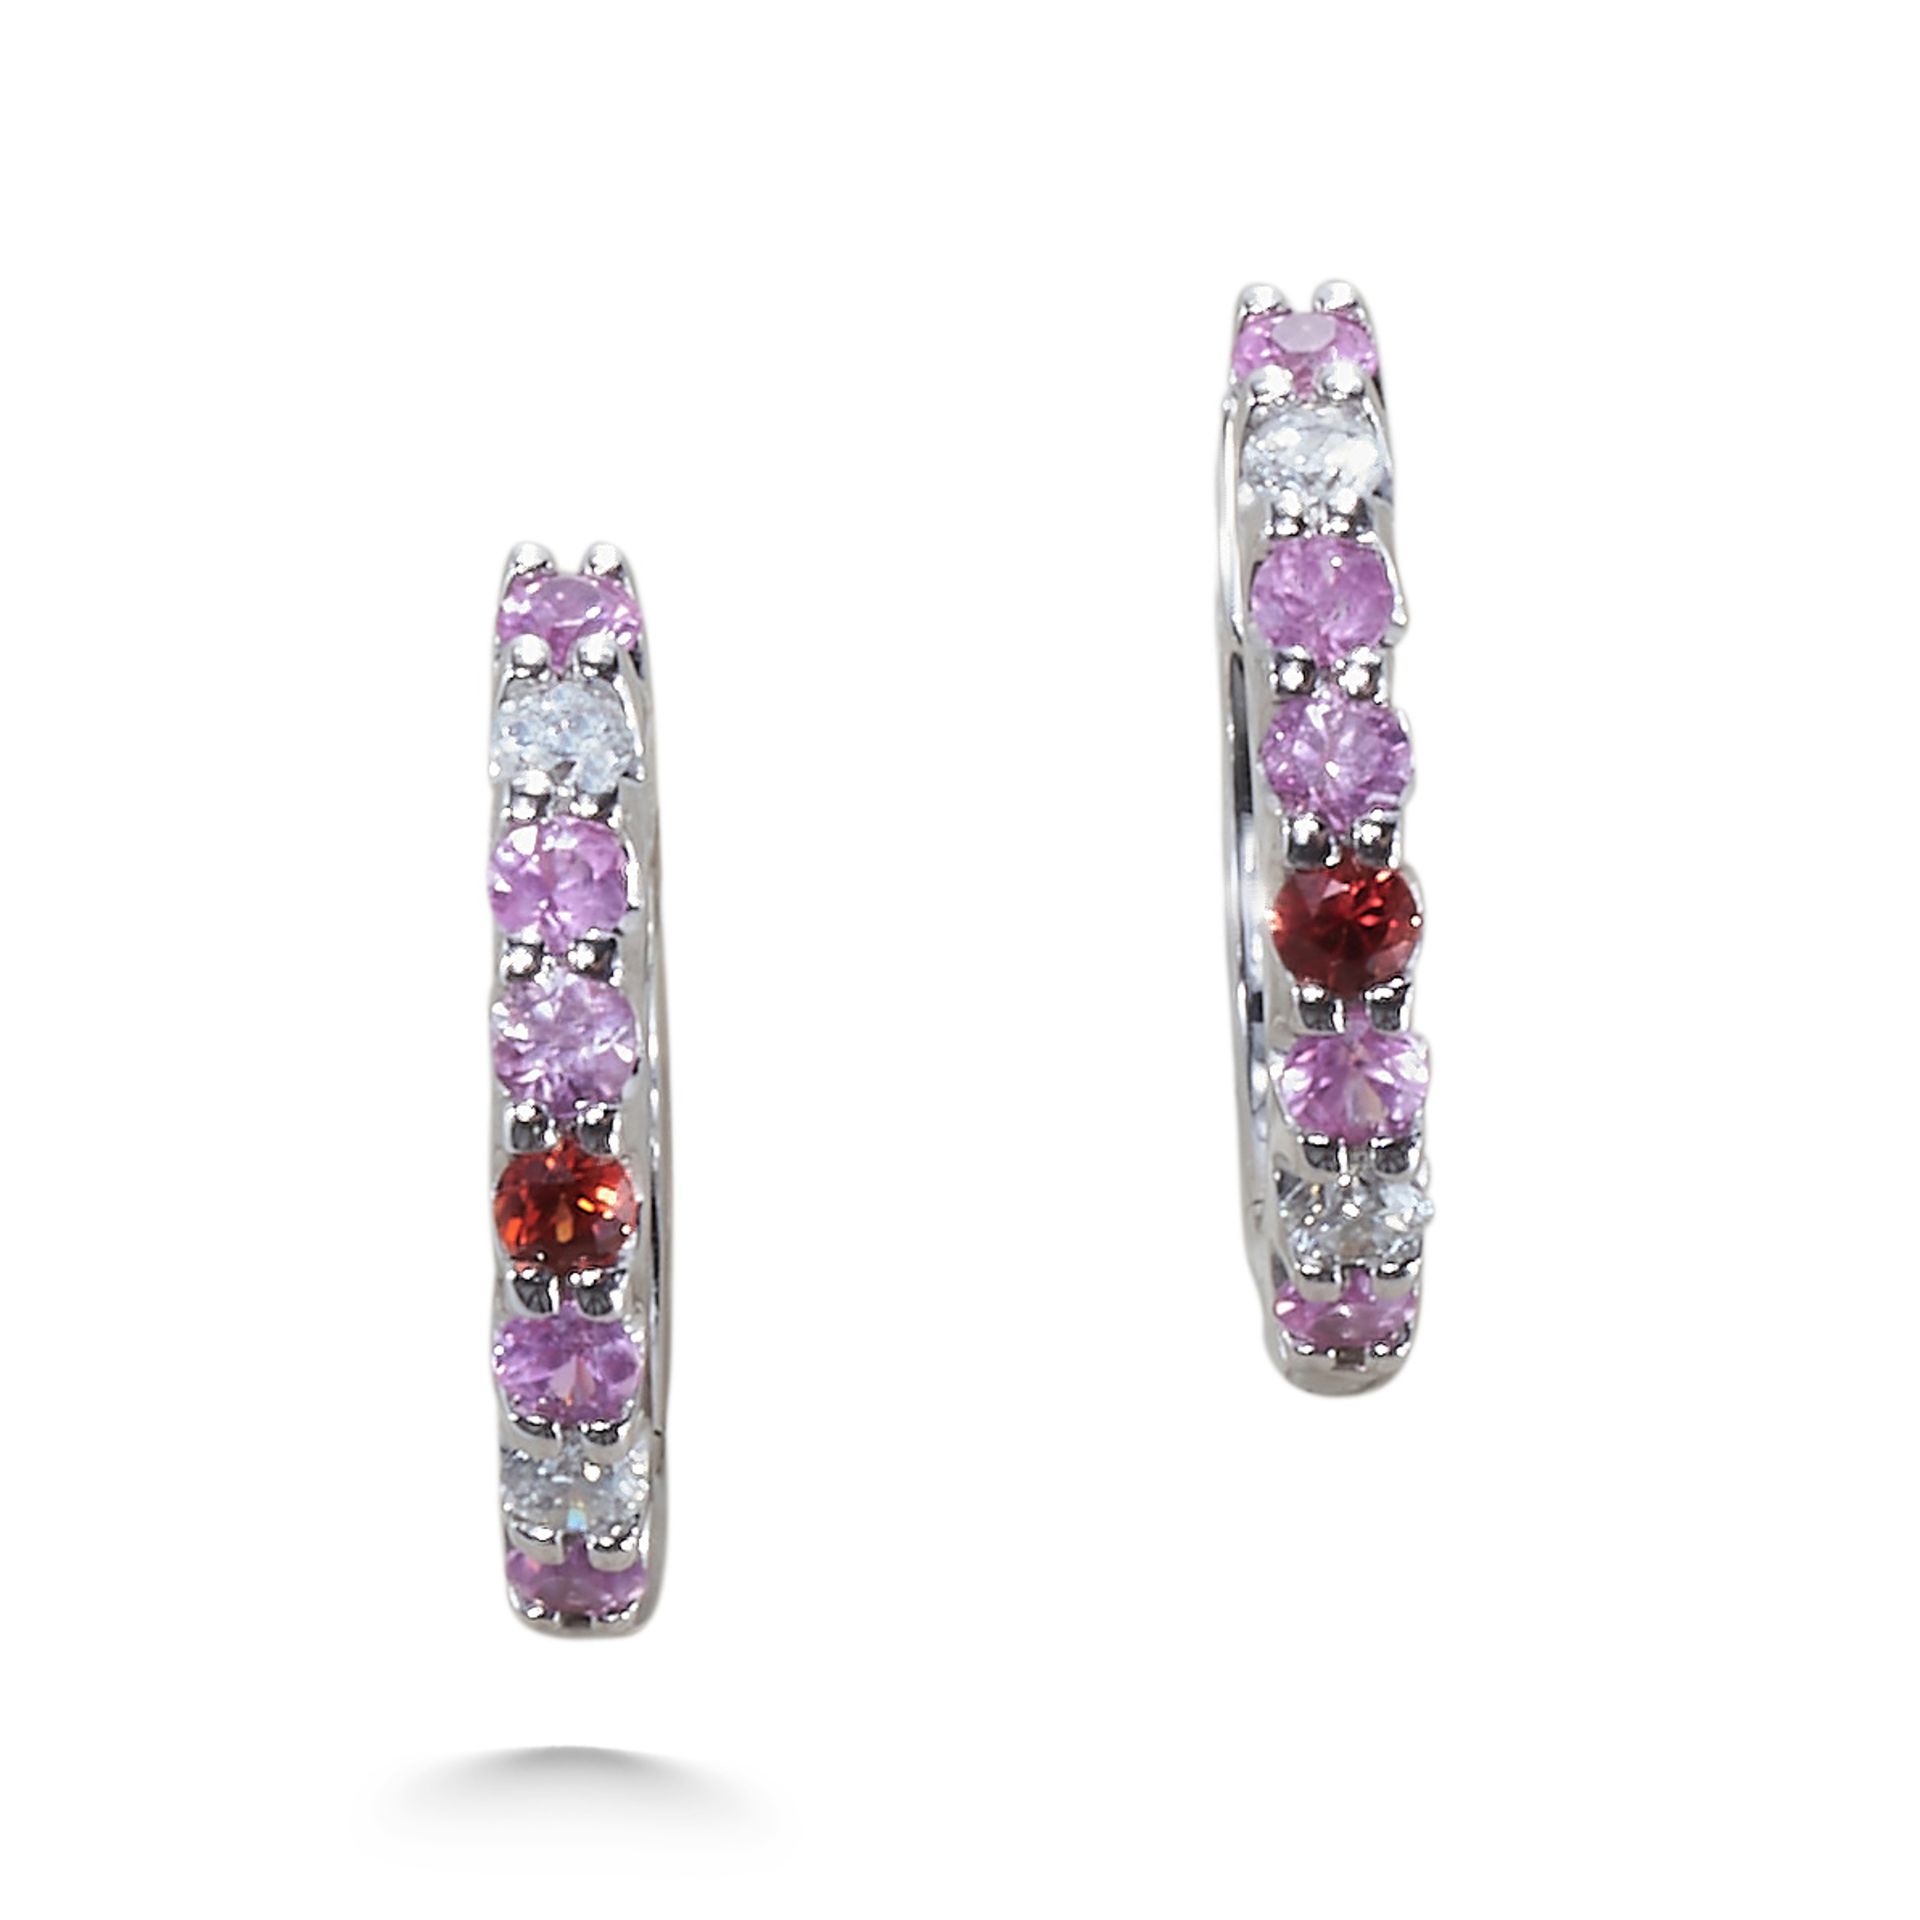 A PINK SAPPHIRE, RUBY AND DIAMOND HOOP EARRINGS, IN 18CT WHITE GOLD.